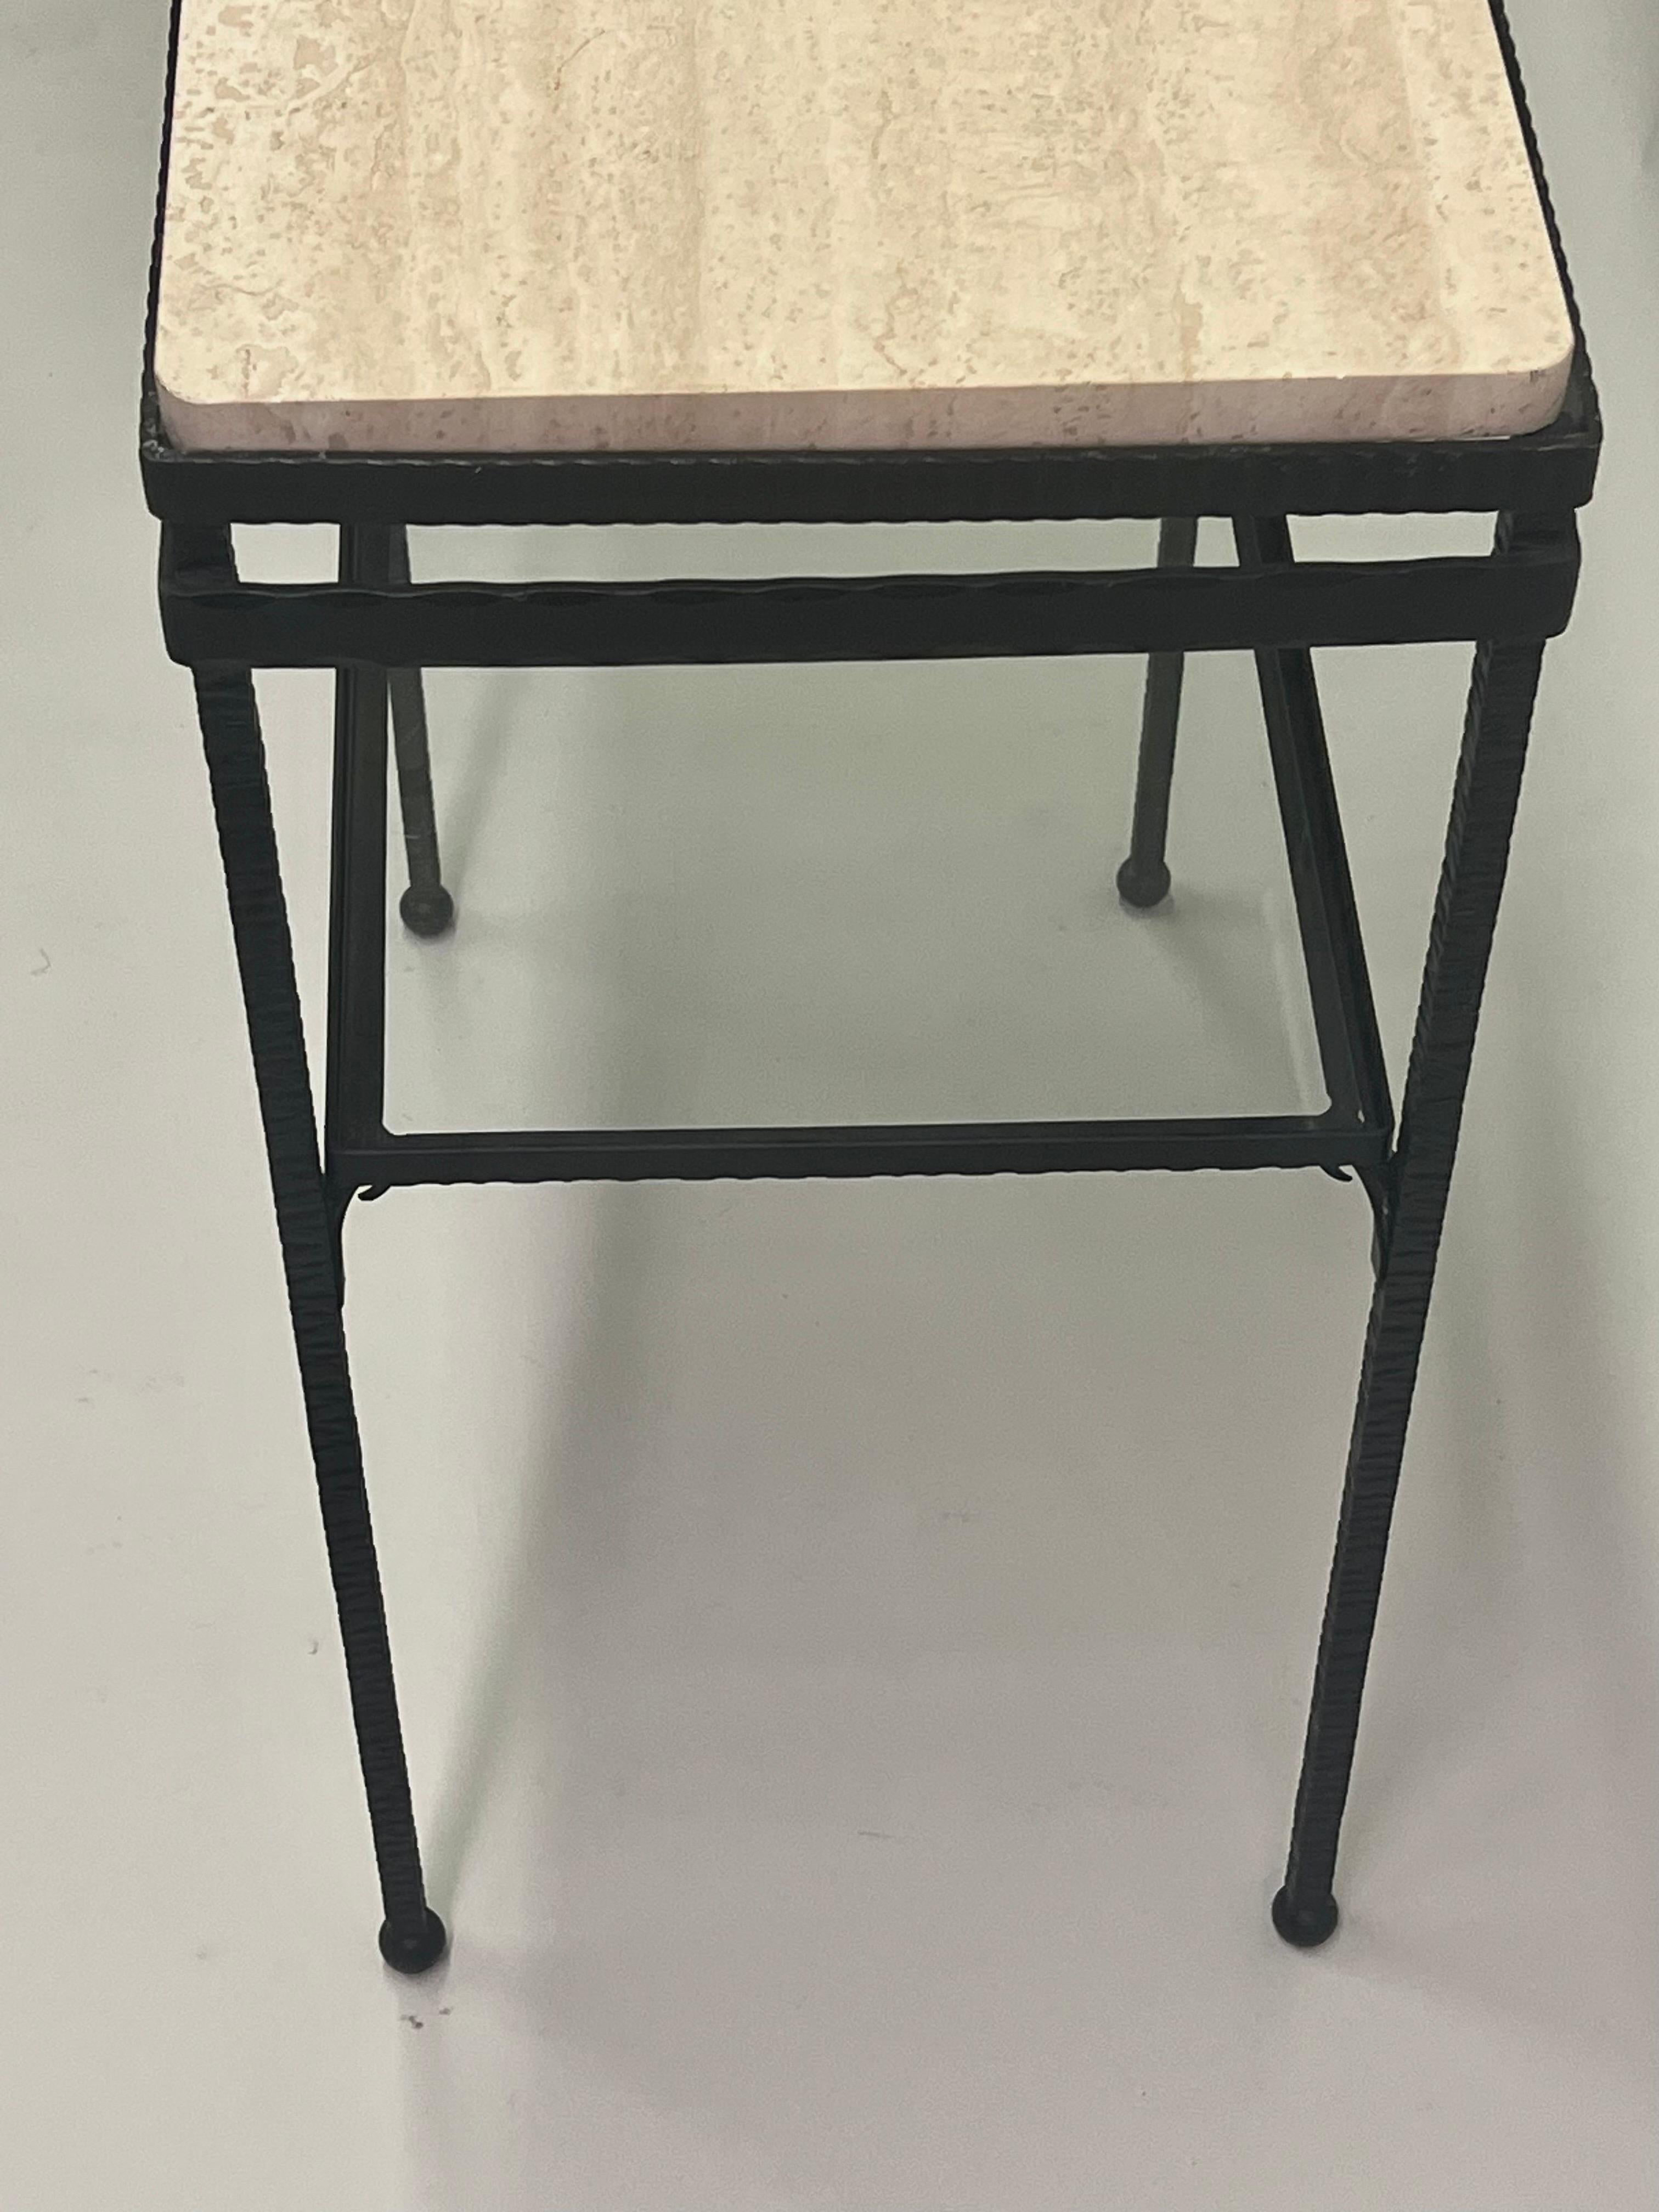 20th Century French Art Deco Wrought Iron and Travertine Console Attributed to Edgar Brandt For Sale